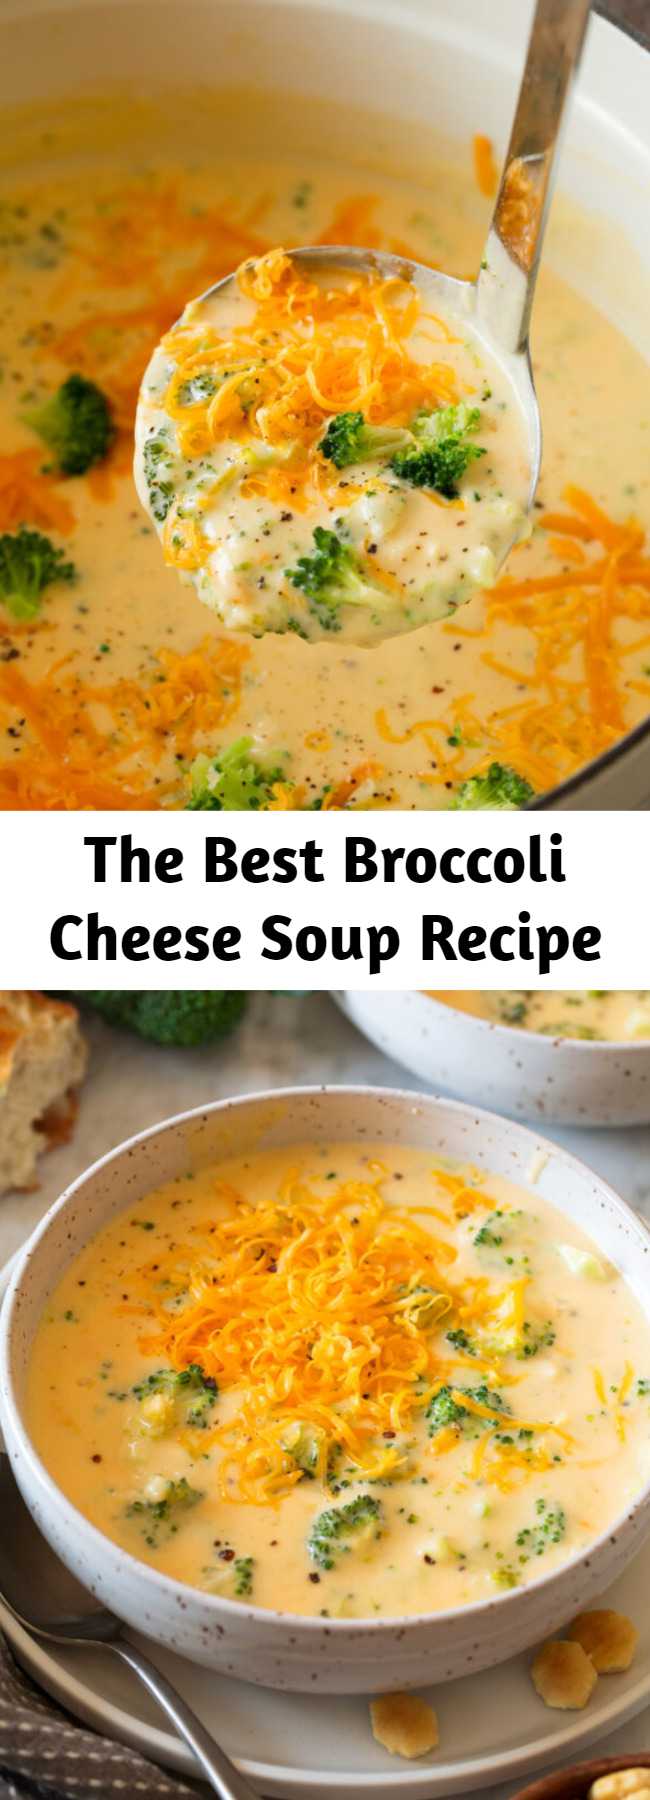 The Best Broccoli Cheese Soup Recipe - Truly the BEST Broccoli Cheese Soup! It's perfectly cheesy, hearty, rich, creamy, and it's super easy to make! Pair it with fresh bread for a delicious cozy dinner. Makes about 8 cups.